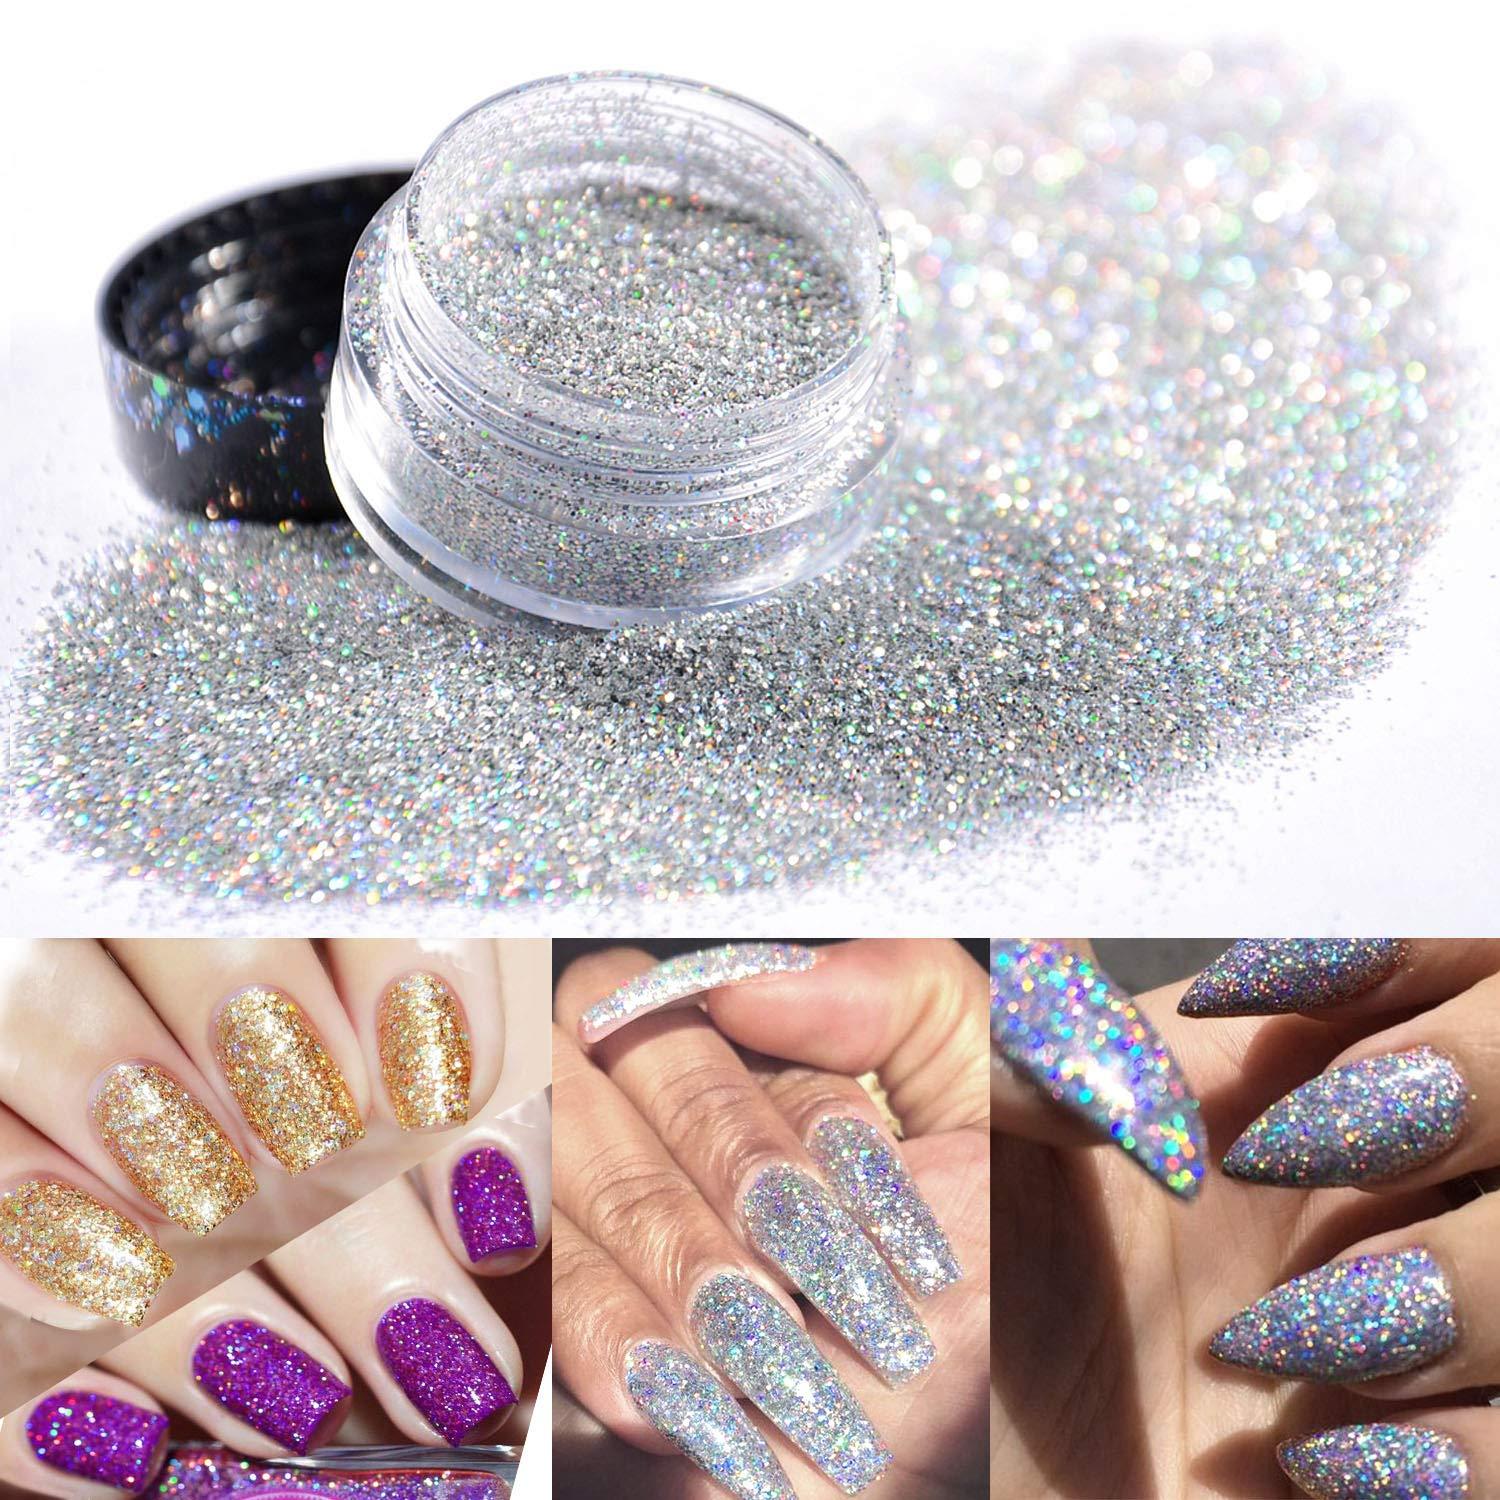 Warmfits Holographic Nail Glitter 12 Colors Holo Laser Superfine